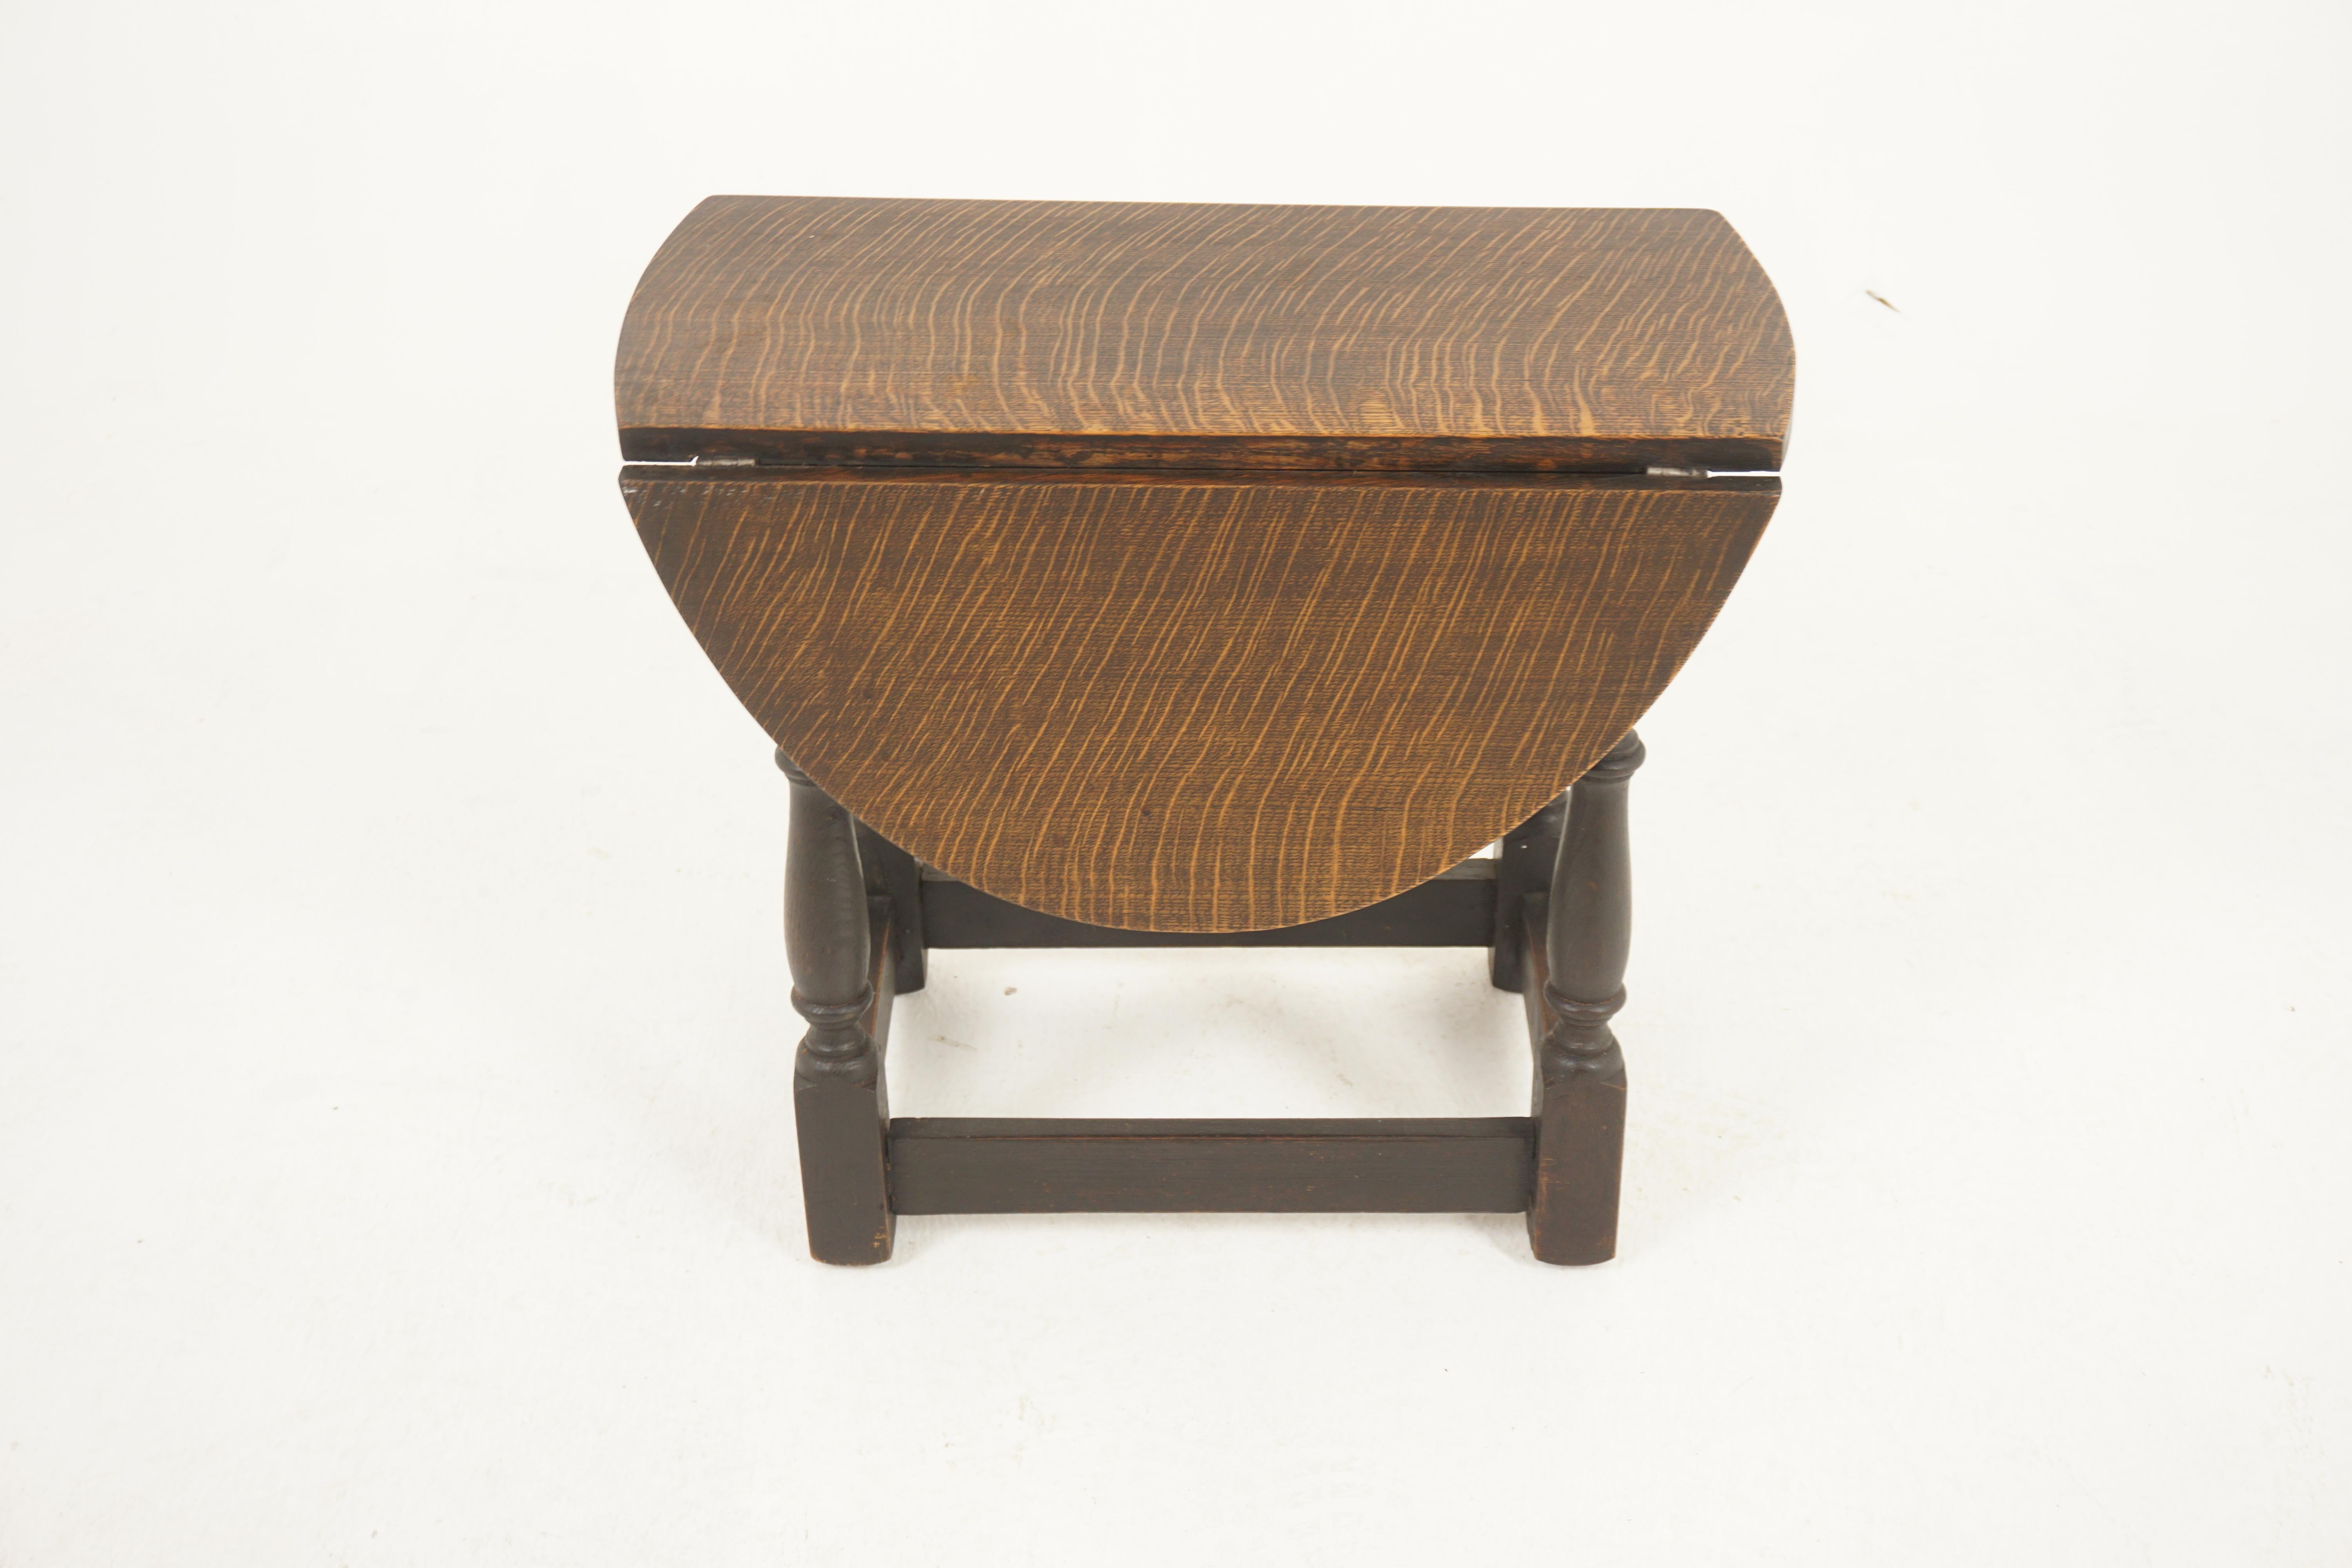 Vintage Oak Drop Leaf Table With Rotating Top, Scotland 1920, H1184

Scotland 1920
Solid Oak
Original Finish
Small proportion table slight rounded ends to to the top
Pair of half mood shaped leaves
When leaves are raised top rotates on base to